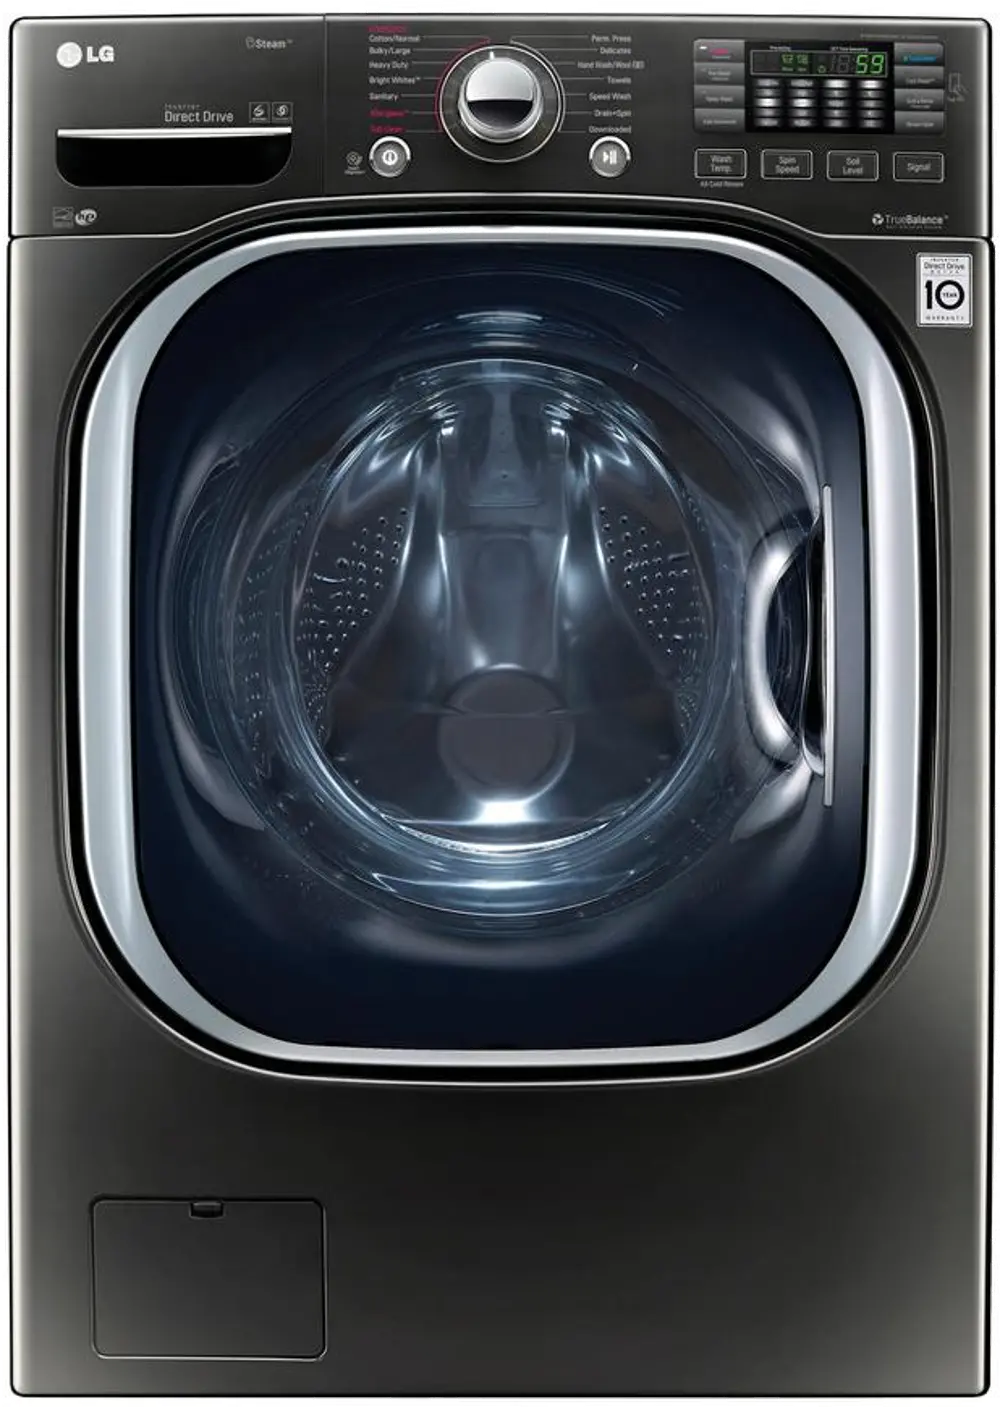 WM4370HKA LG Front Load Washer - 4.5 cu. ft. Black Stainless Steel-1